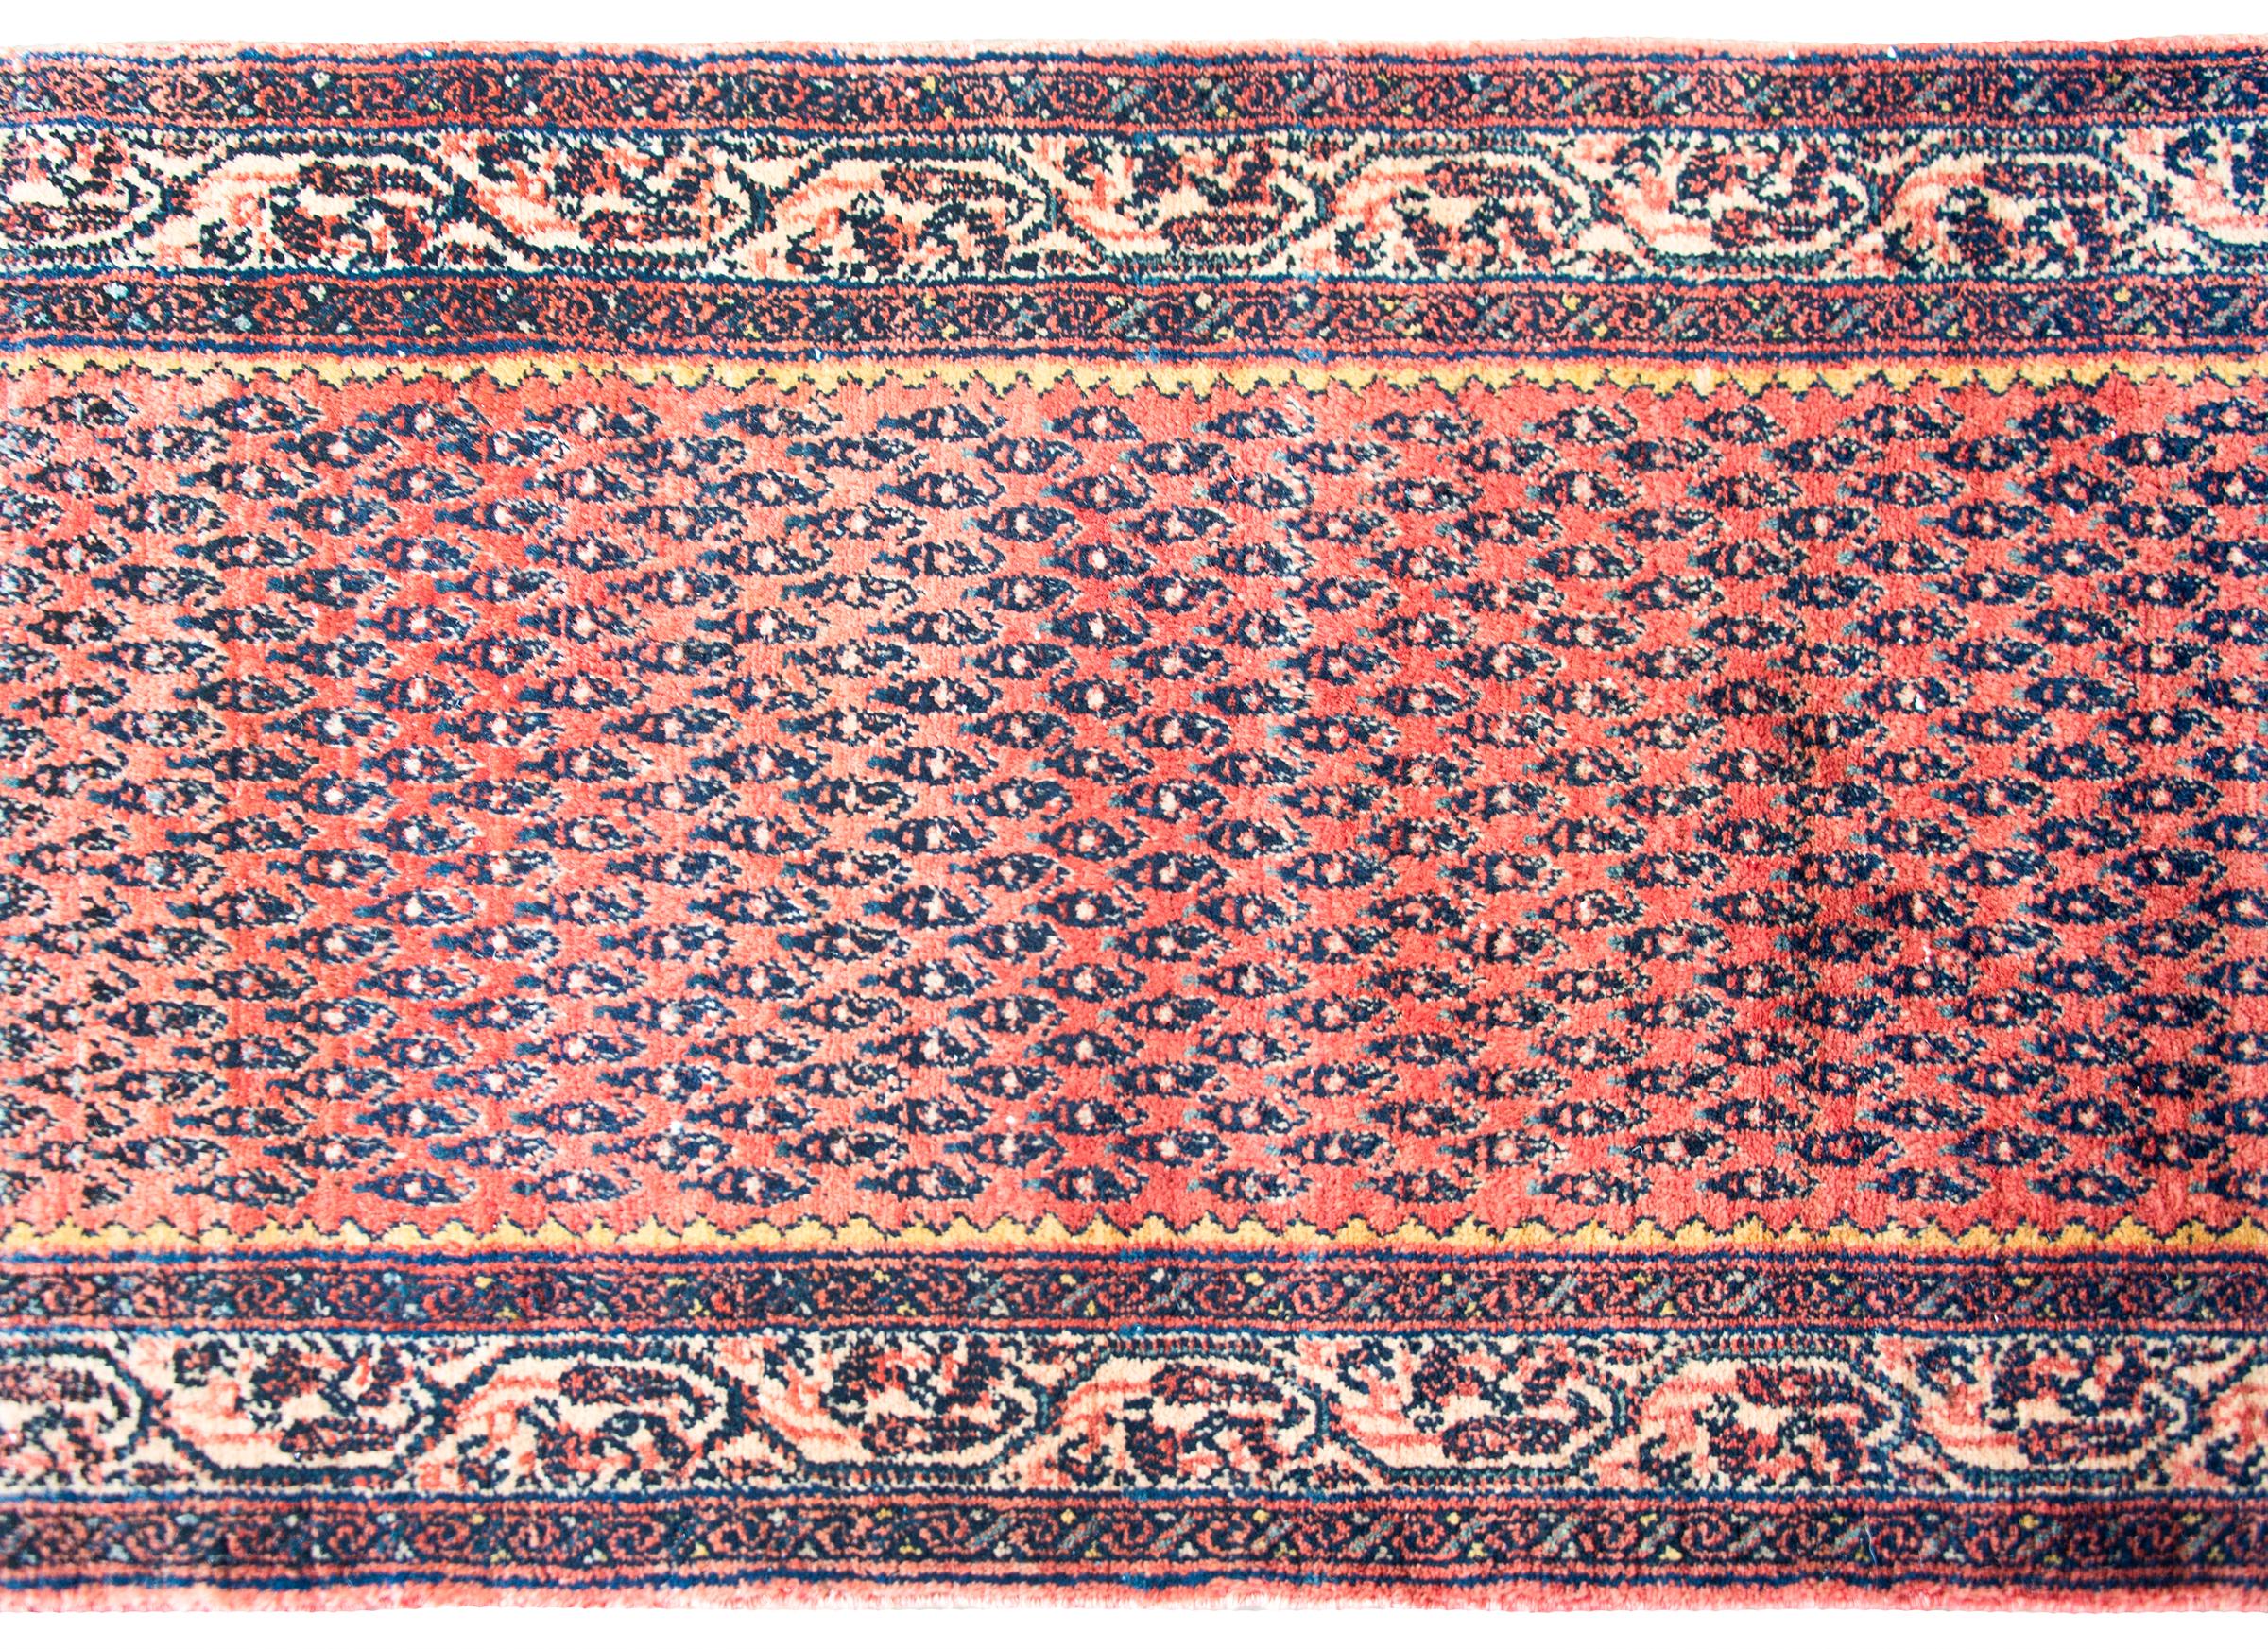 Early 20th Century Persian Seraband Runner In Good Condition For Sale In Chicago, IL